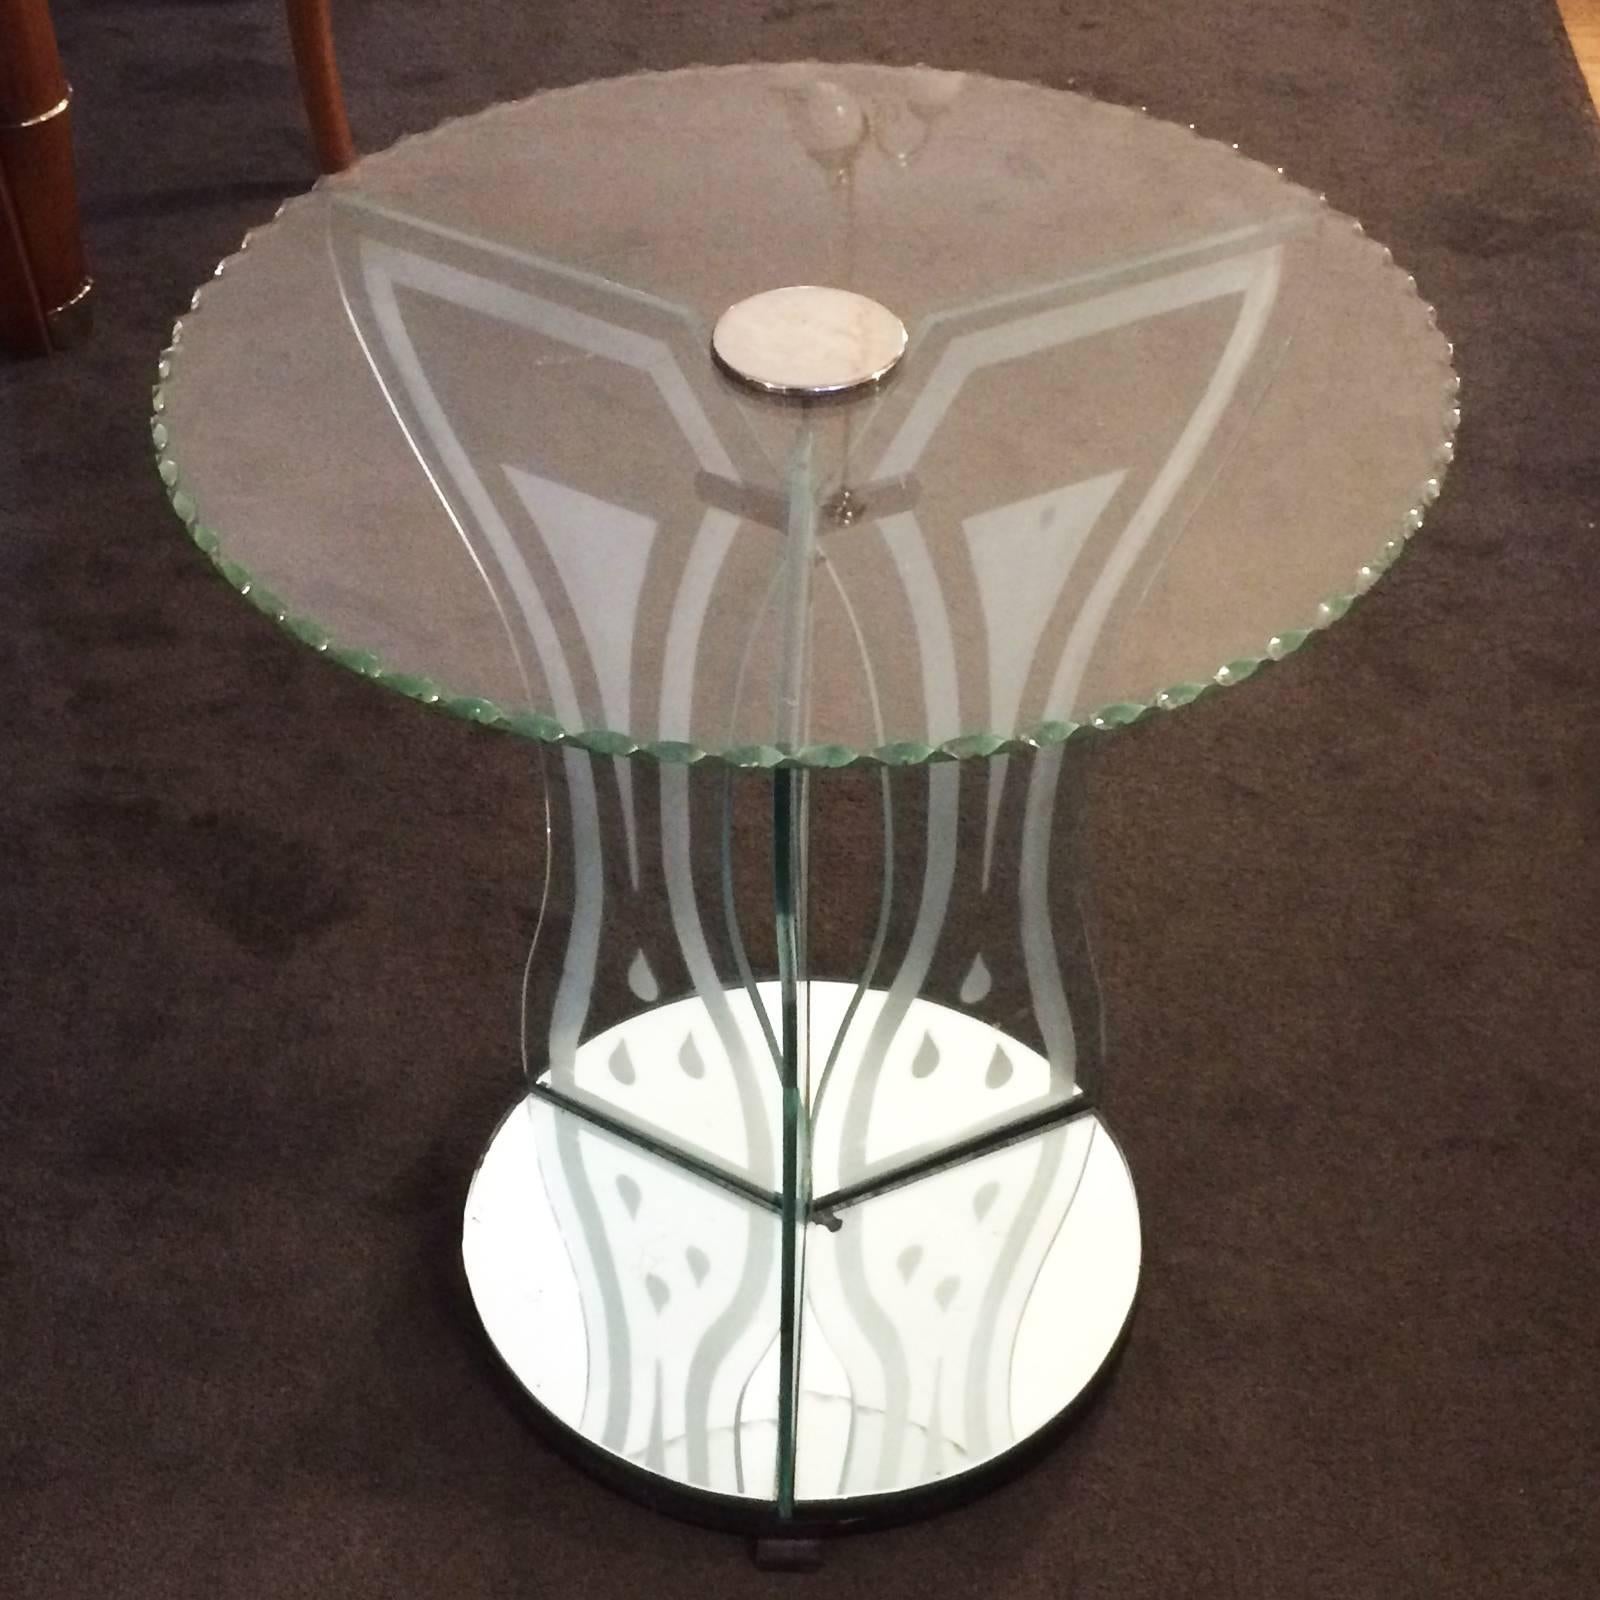 Great Britain (UK) Art Deco Etched Glass Mirror Coffee Side Table For Sale